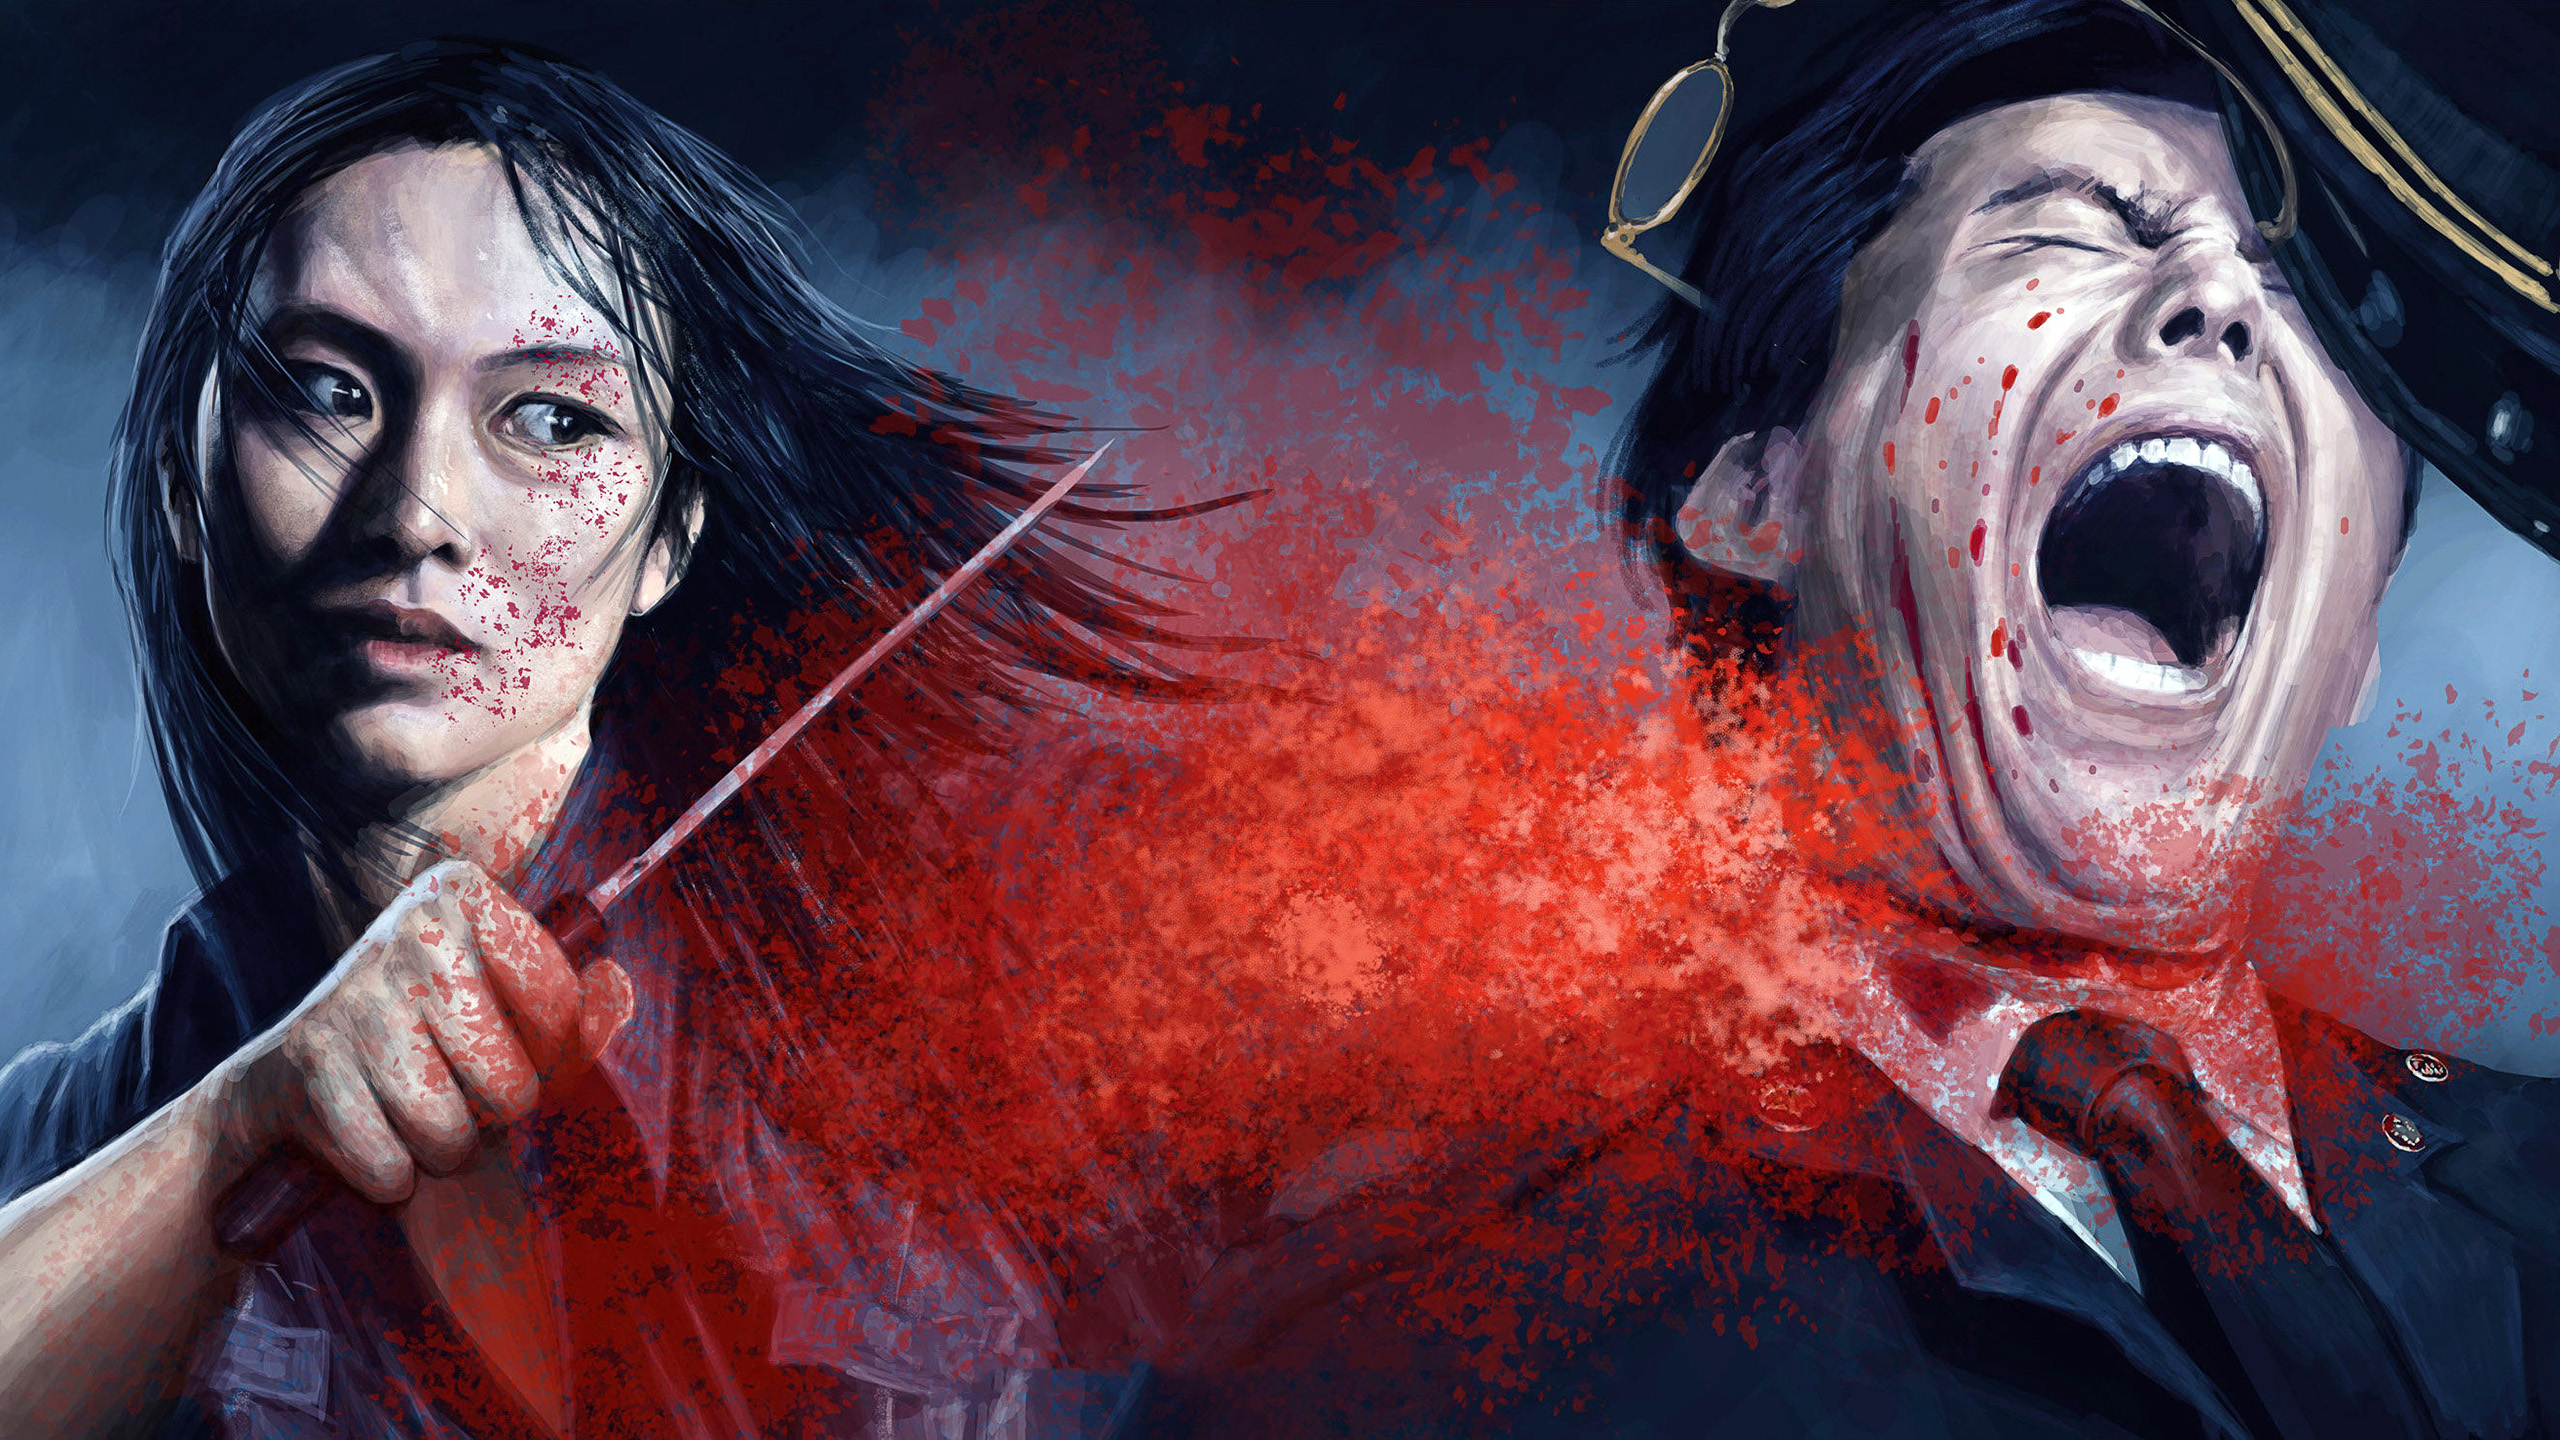 General 2560x1440 wormrot album covers Asian blood painting knife gore